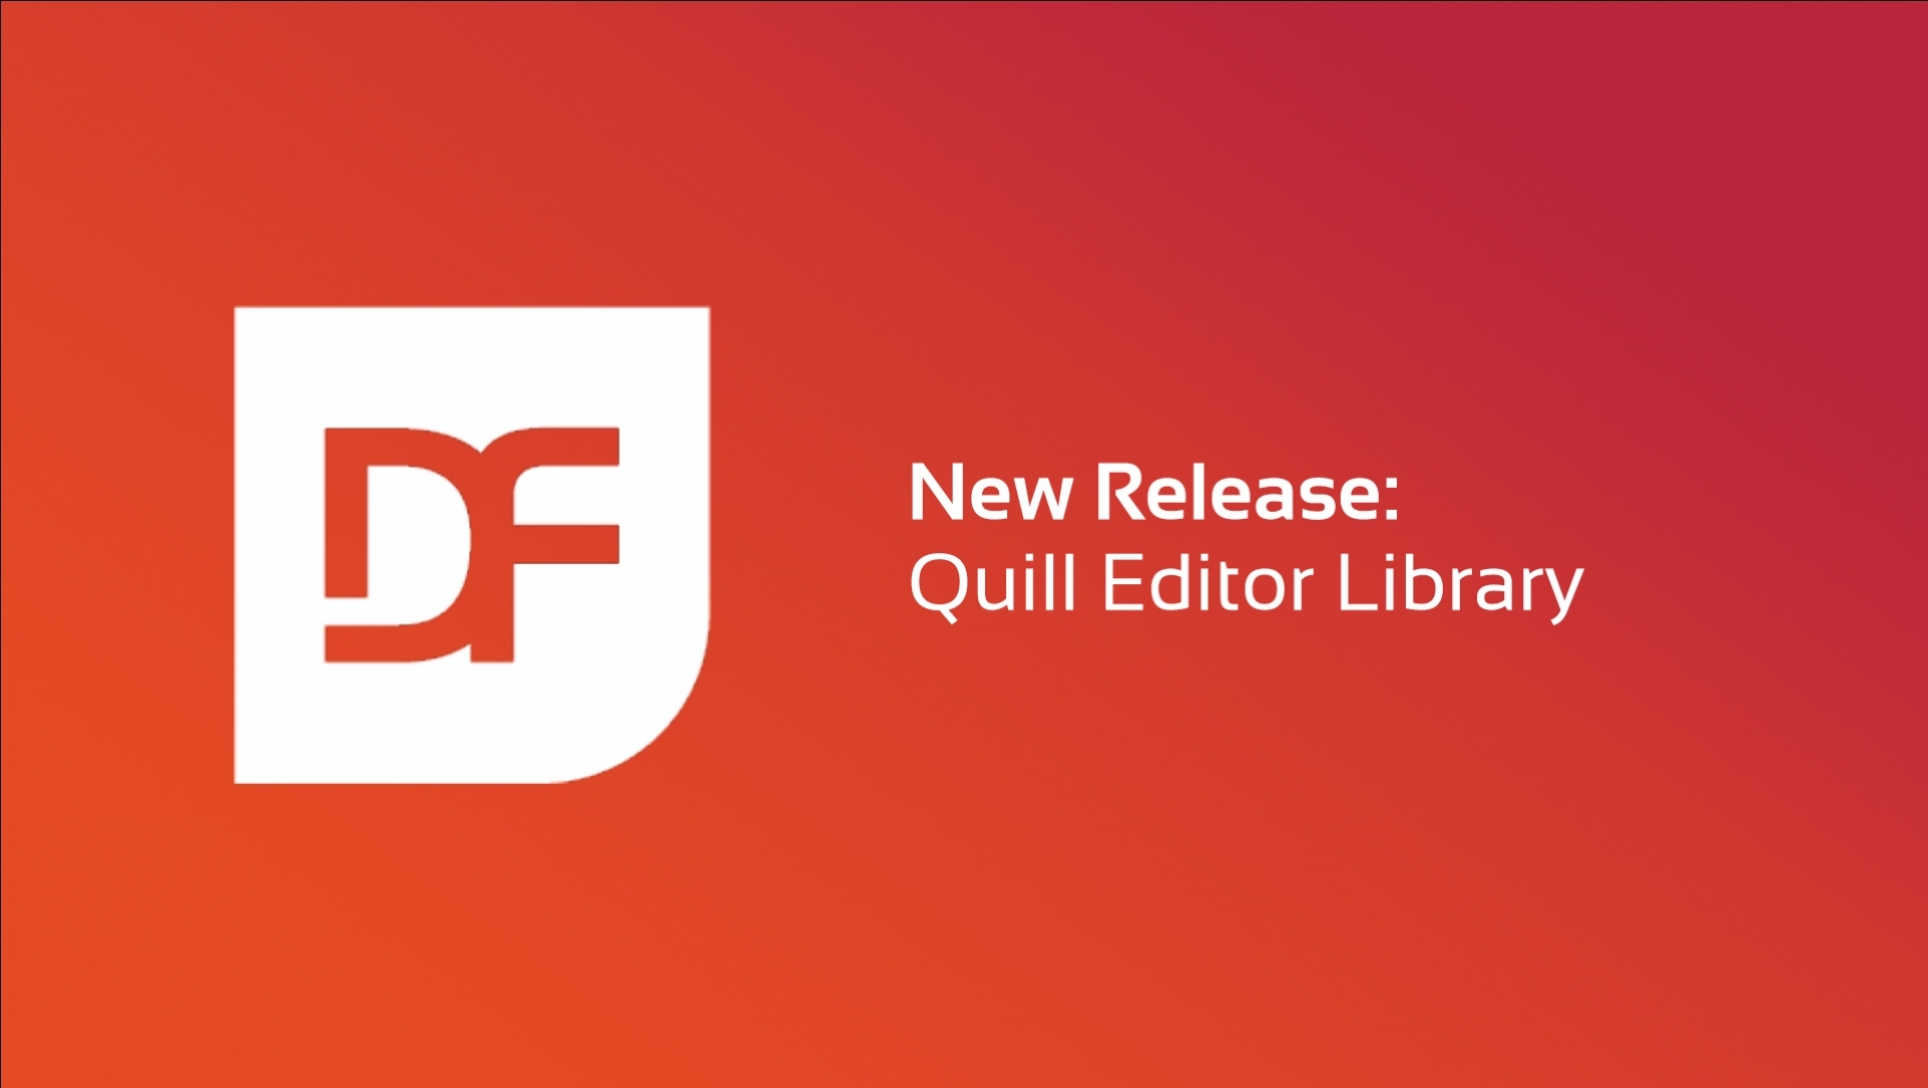 New Release: DataFlex Library for Quill Editor